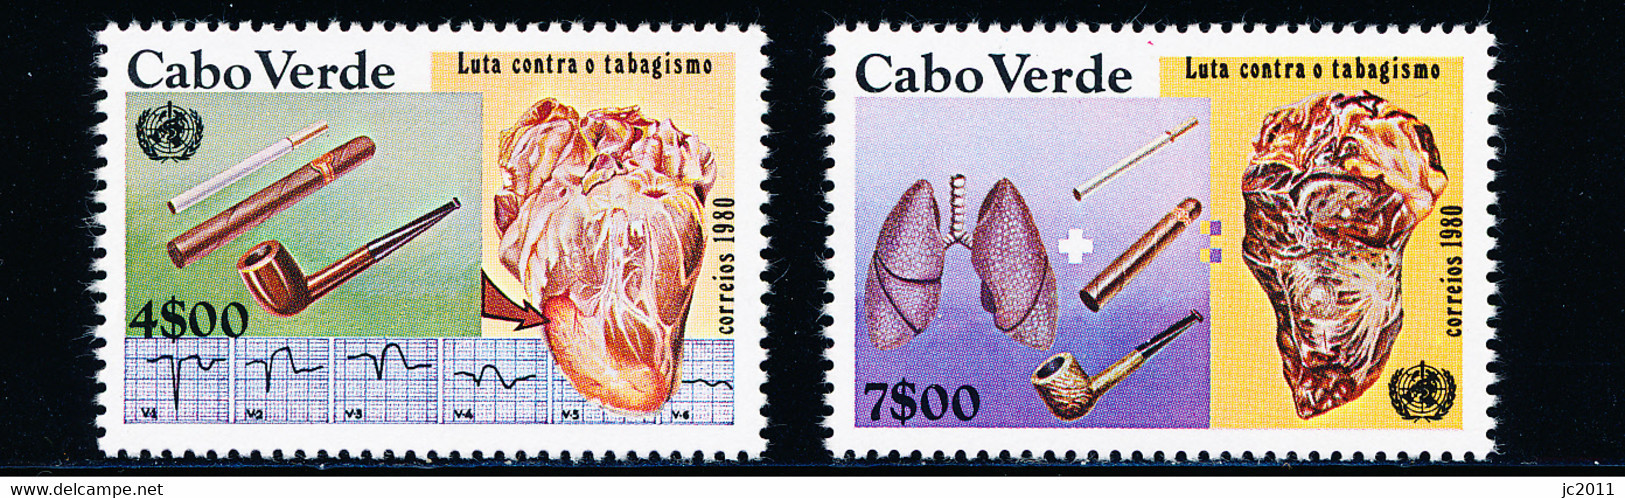 Cabo Verde - 1980 - Smoking / Fight Against - World Health Day - MNH - Isola Di Capo Verde